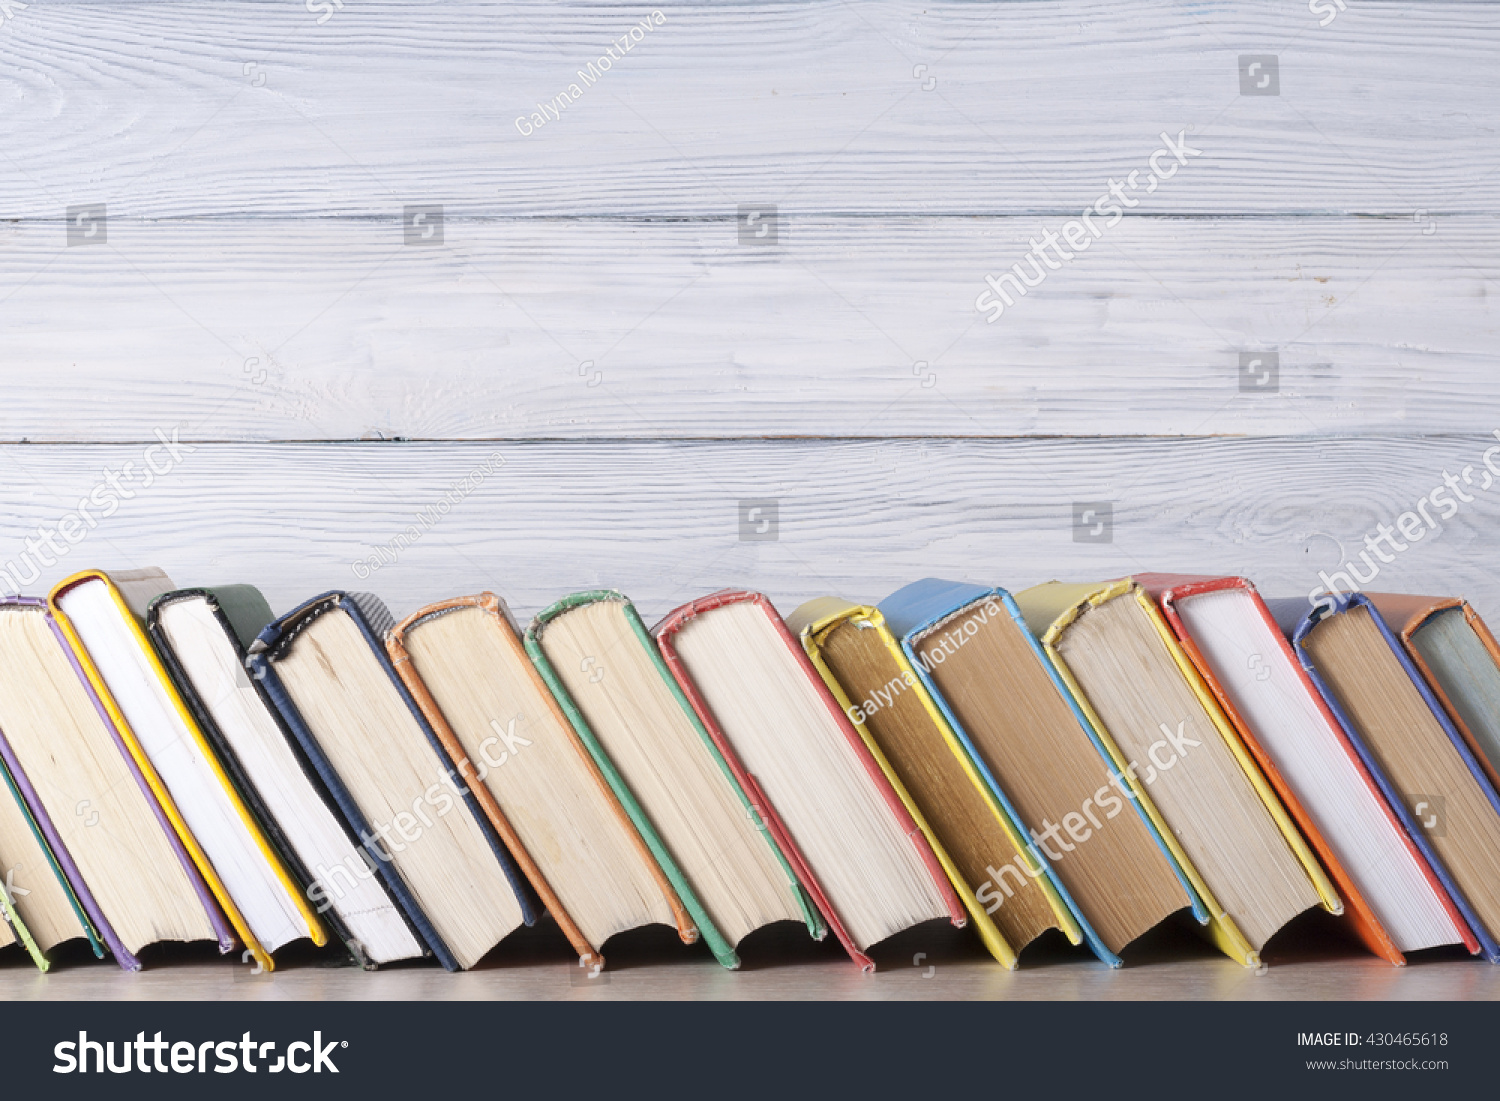 Stack of colorful books. Education background. Back to school. Copy space for text #430465618